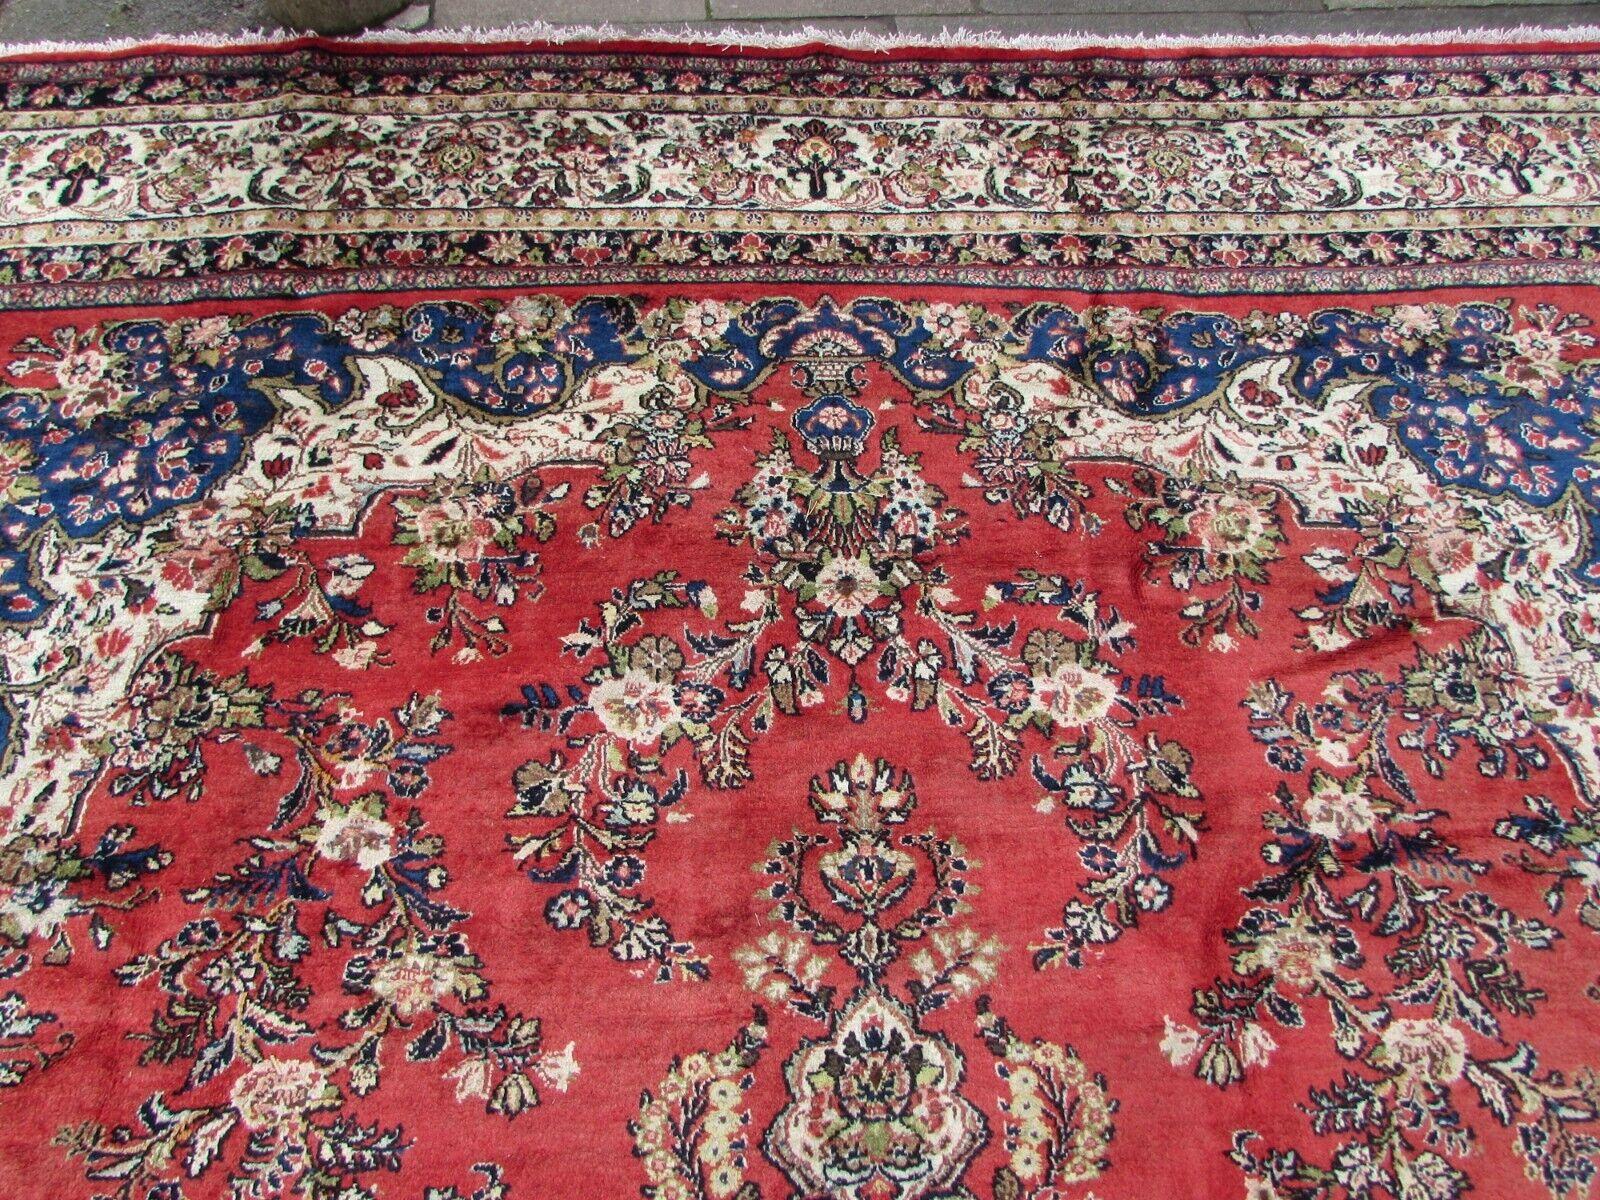 Handmade Vintage Persian Style Sarouk Oversize Rug 10.7' x 16.4', 1970s - 1Q72 For Sale 5